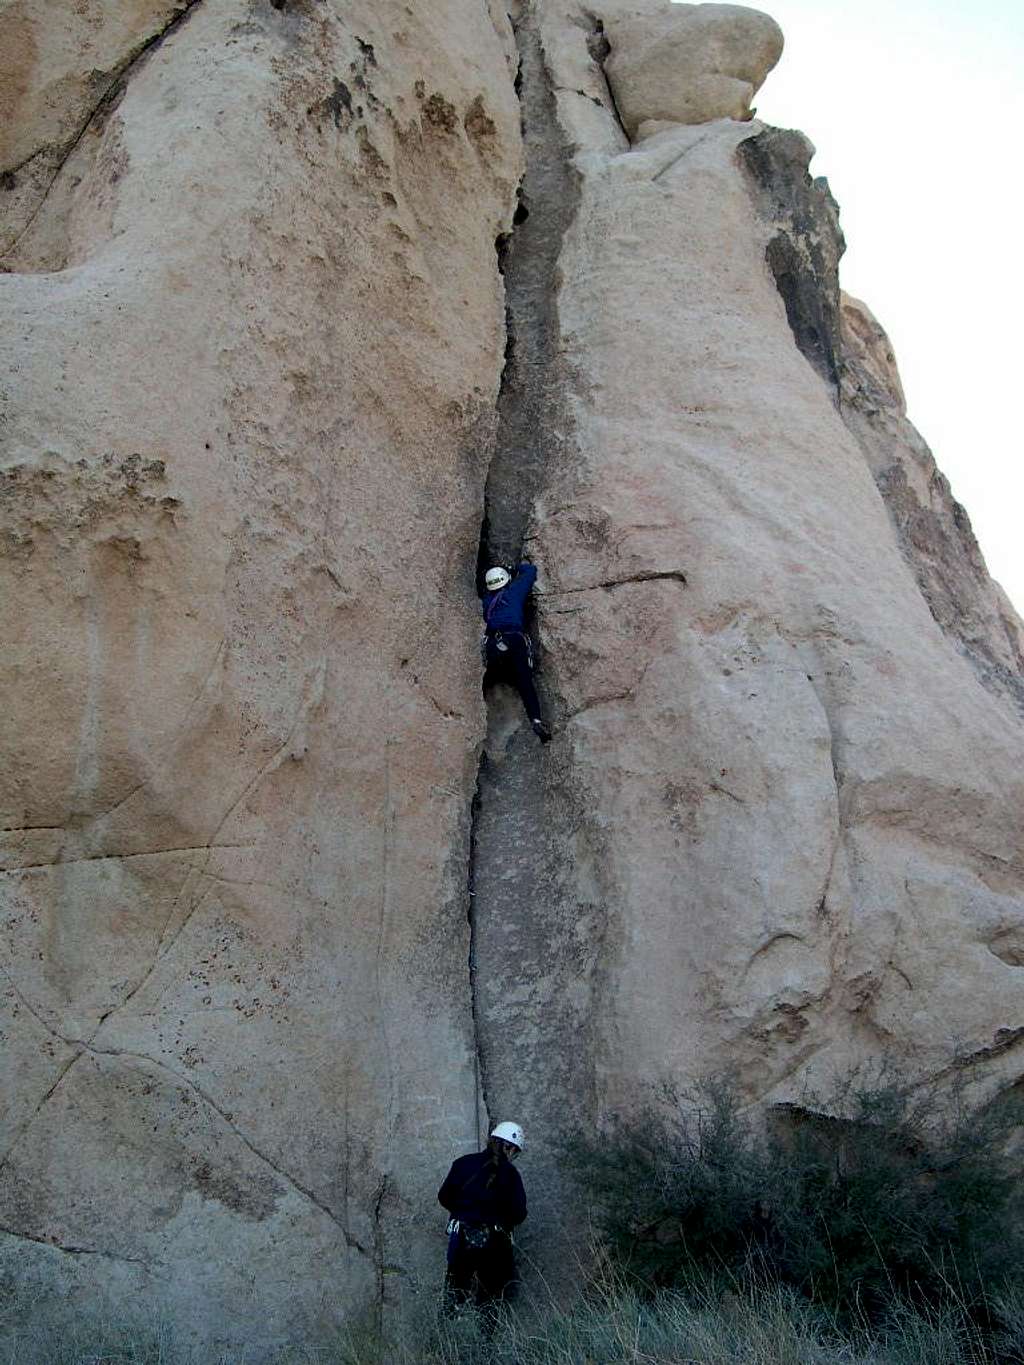 Trench Connection, 5.7, J Tree NP. California.